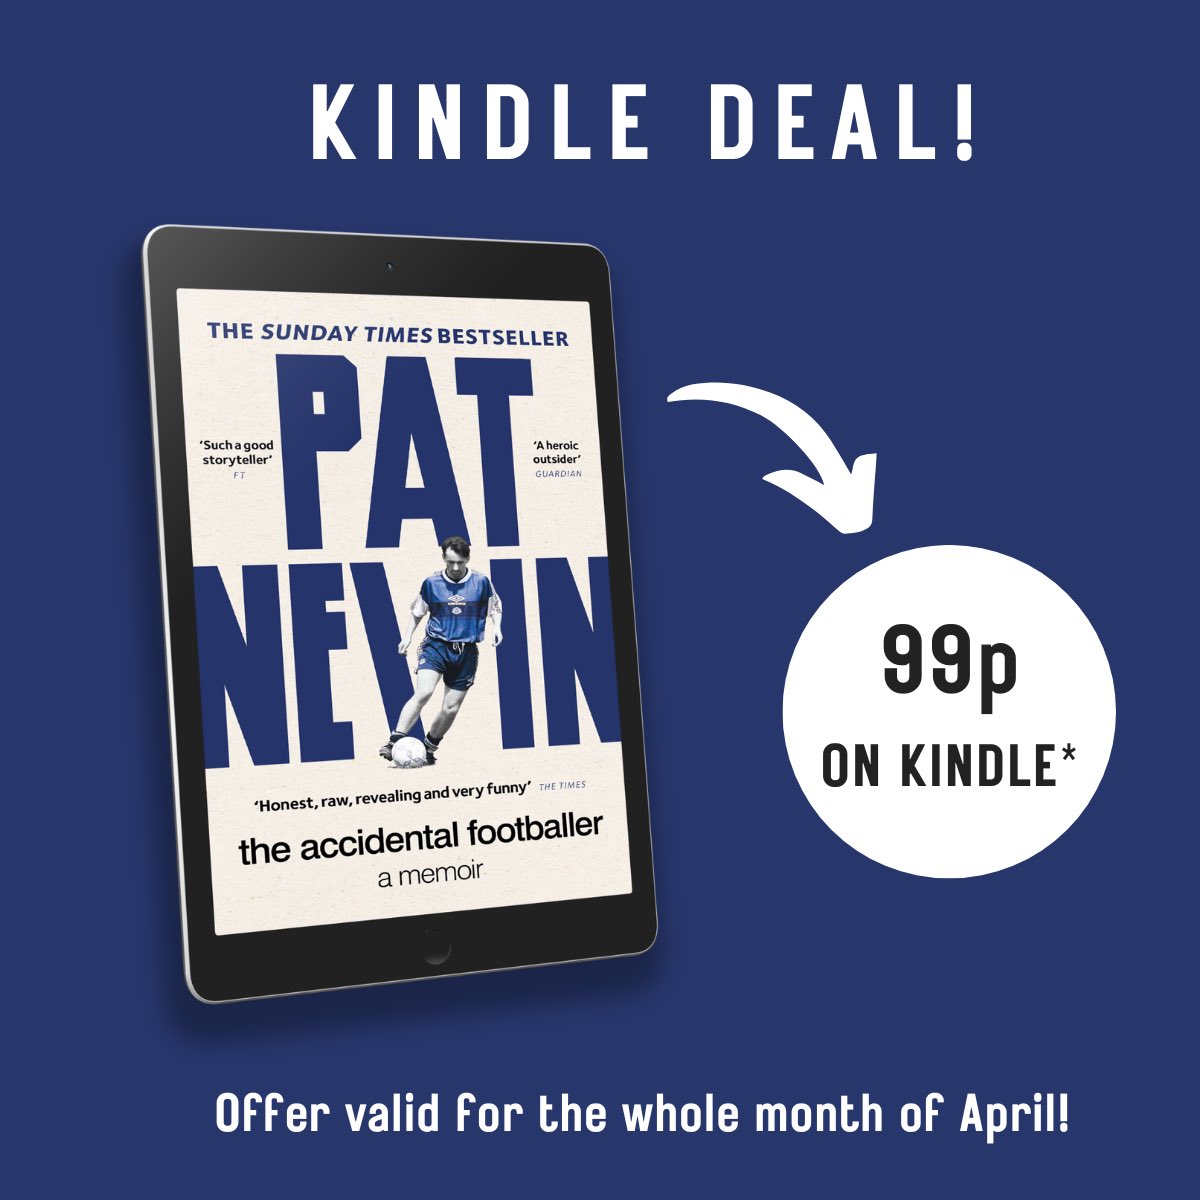 I’m actually delighted this is being made available at this price for a month. Thanks to Kindle for sorting it!